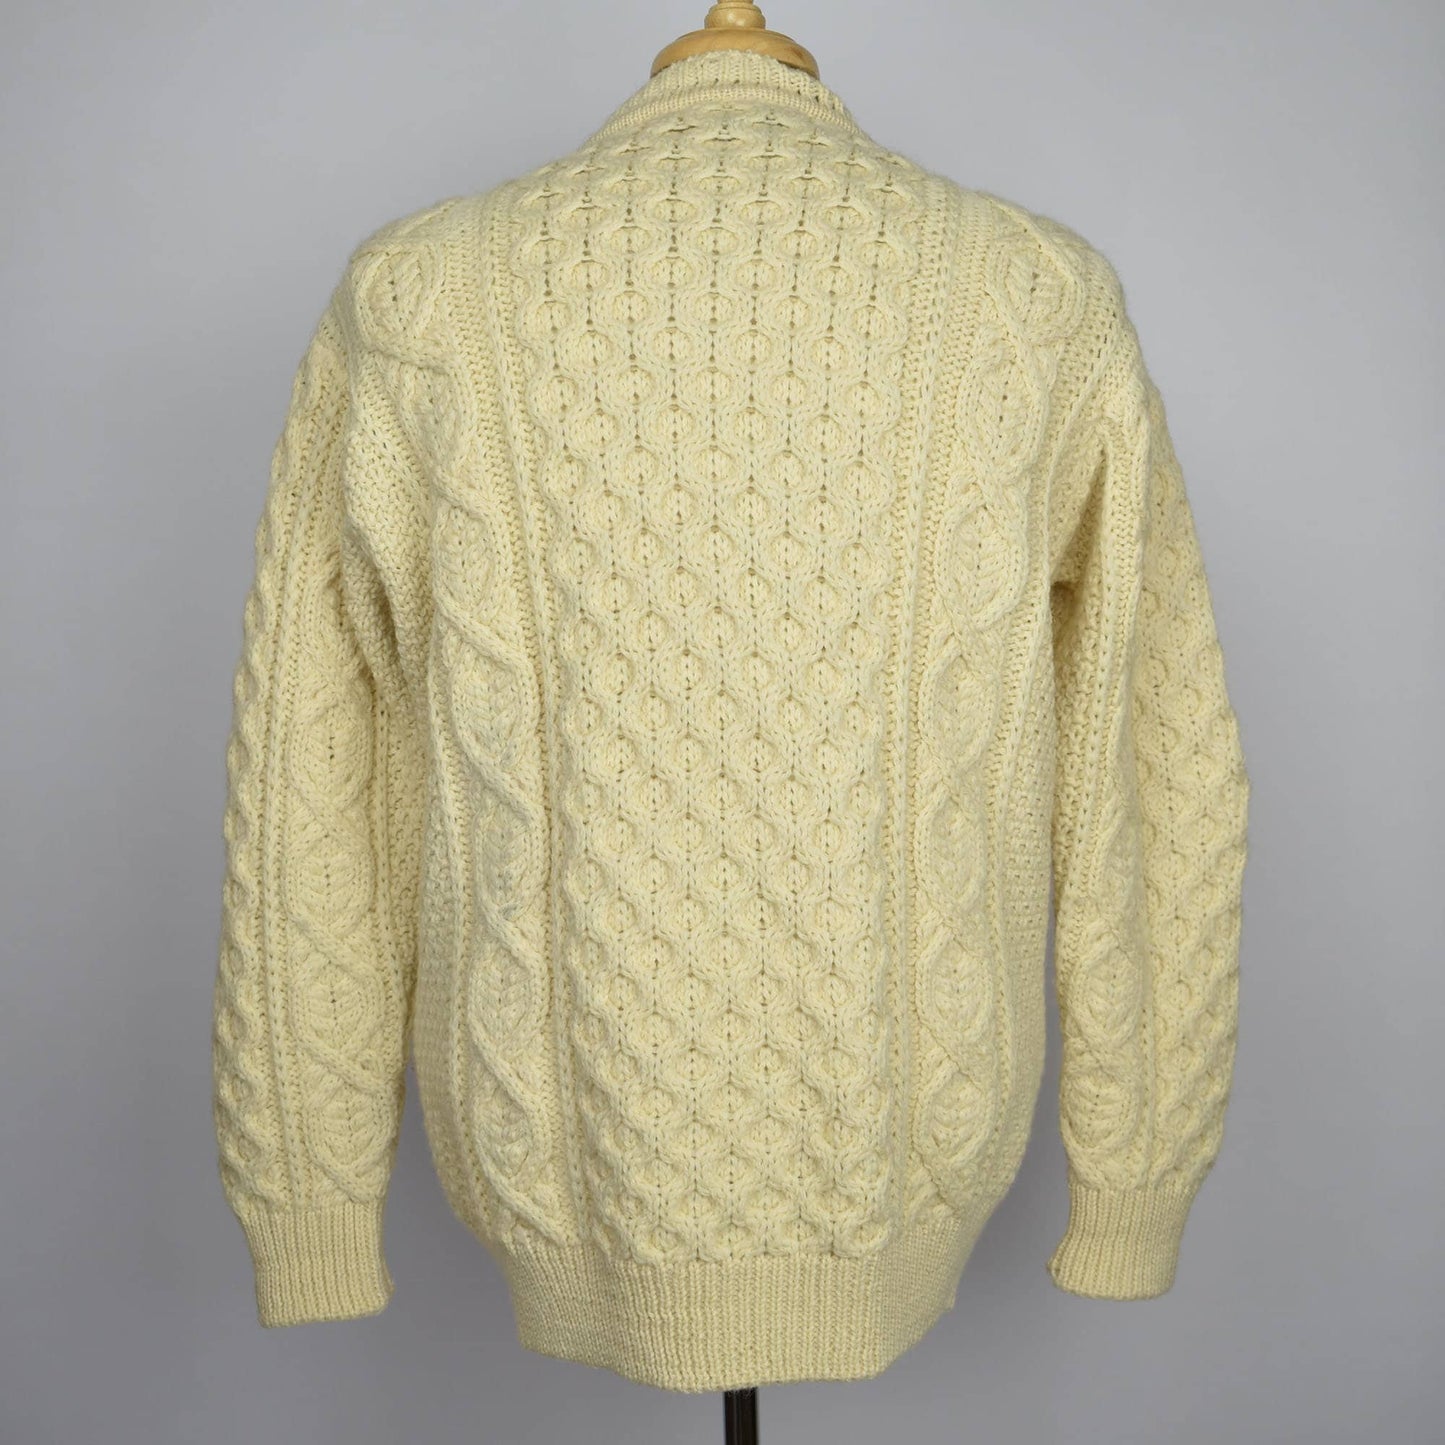 Vintage 90s Bonner of Ireland Cable Knit Wool Ivory Cardigan Sweater - Made in Ireland - Size L